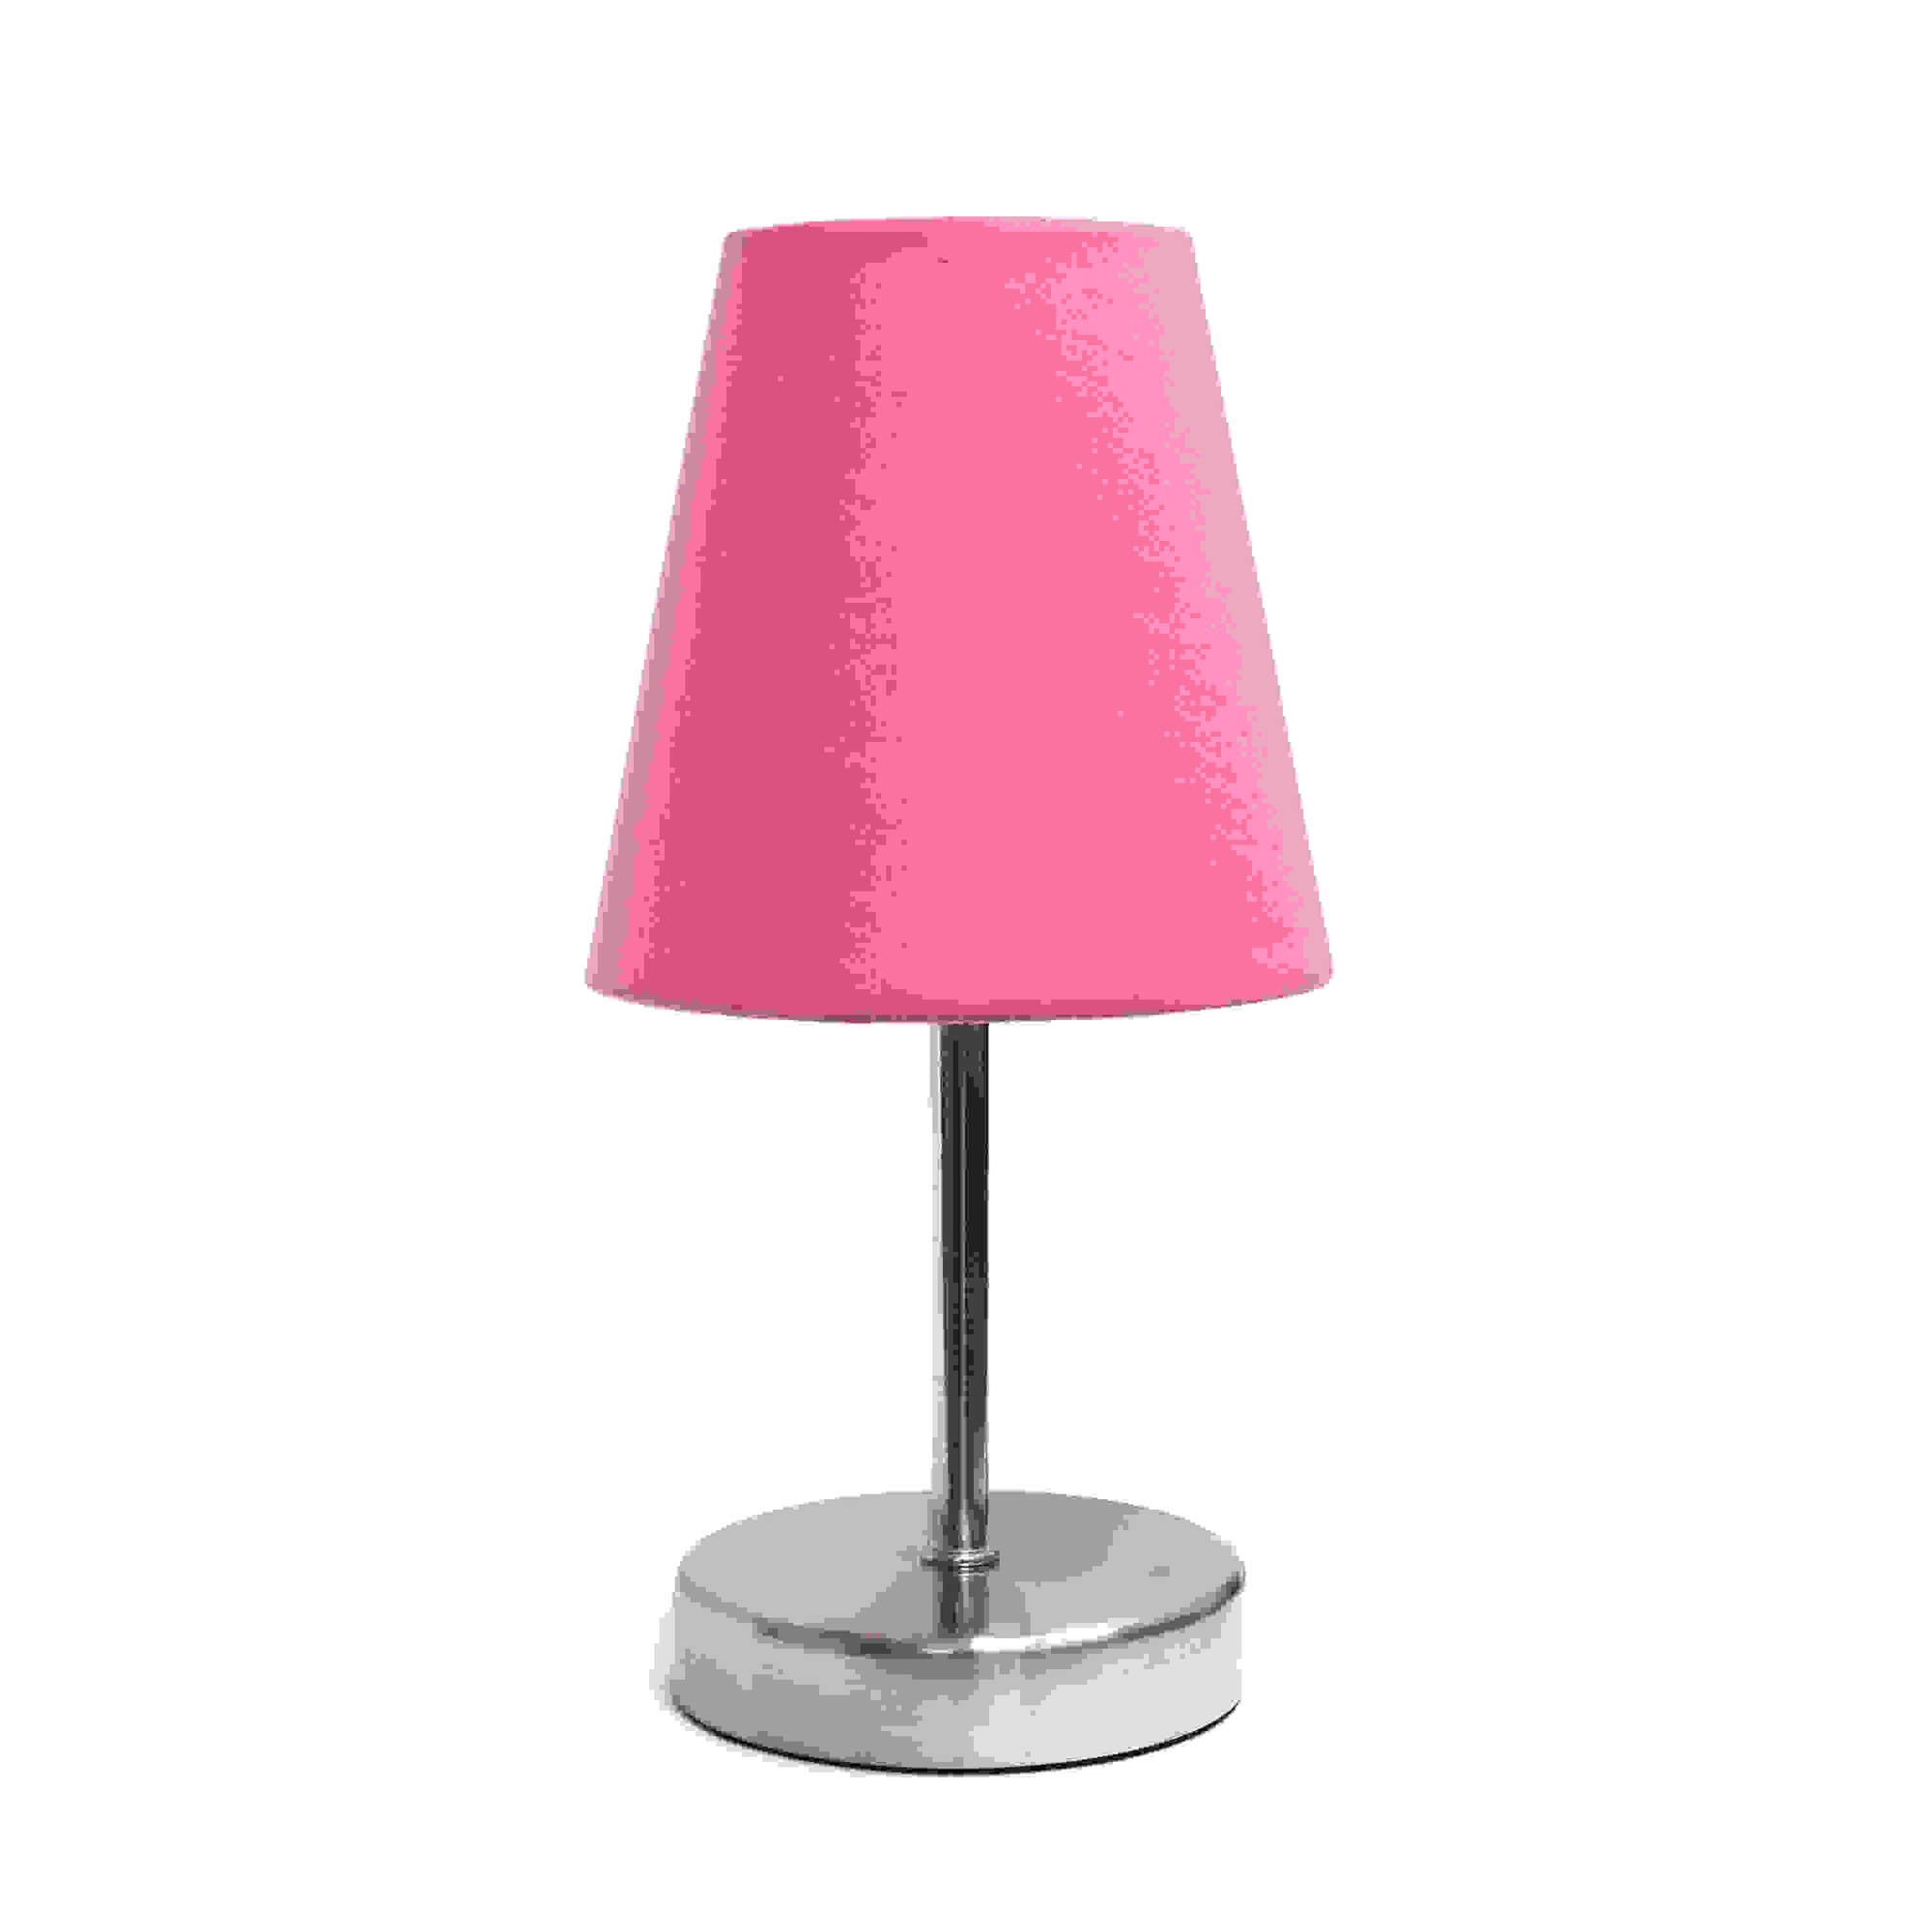 Simple Designs Sand Nickel Mini Basic Table Lamp with Fabric Shade, Pink